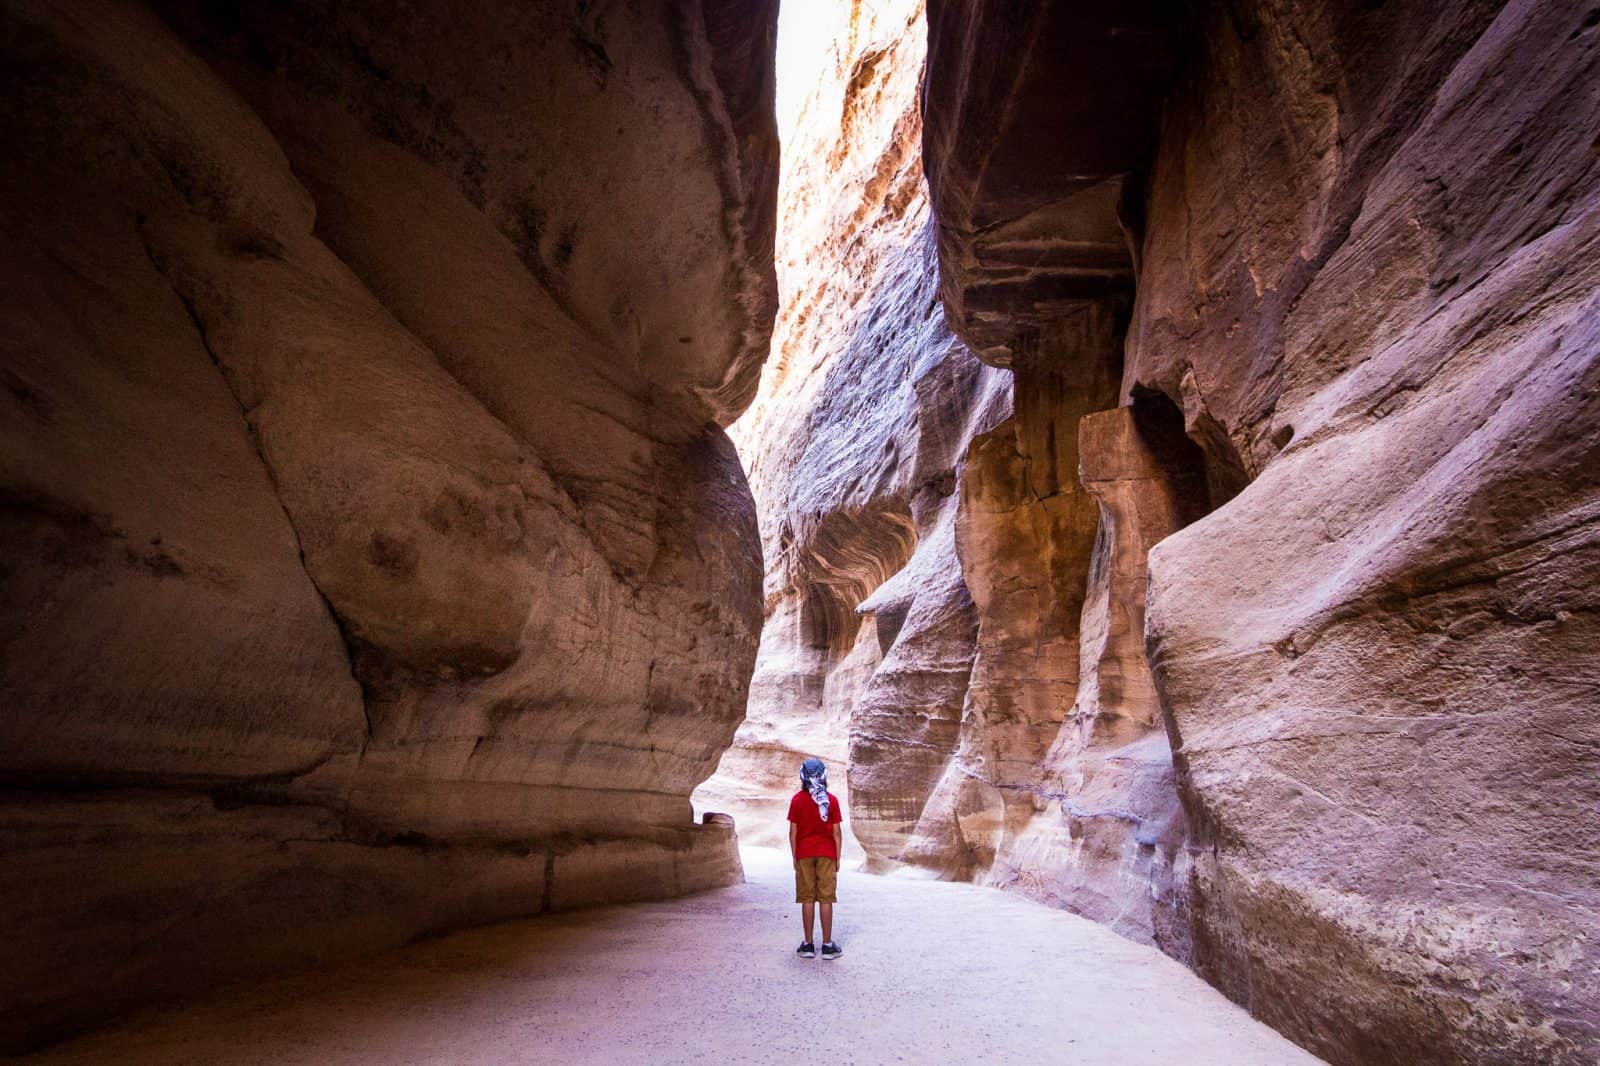 A small boy is enveloped by the walls of the Siq in the City of Petra, Jordan